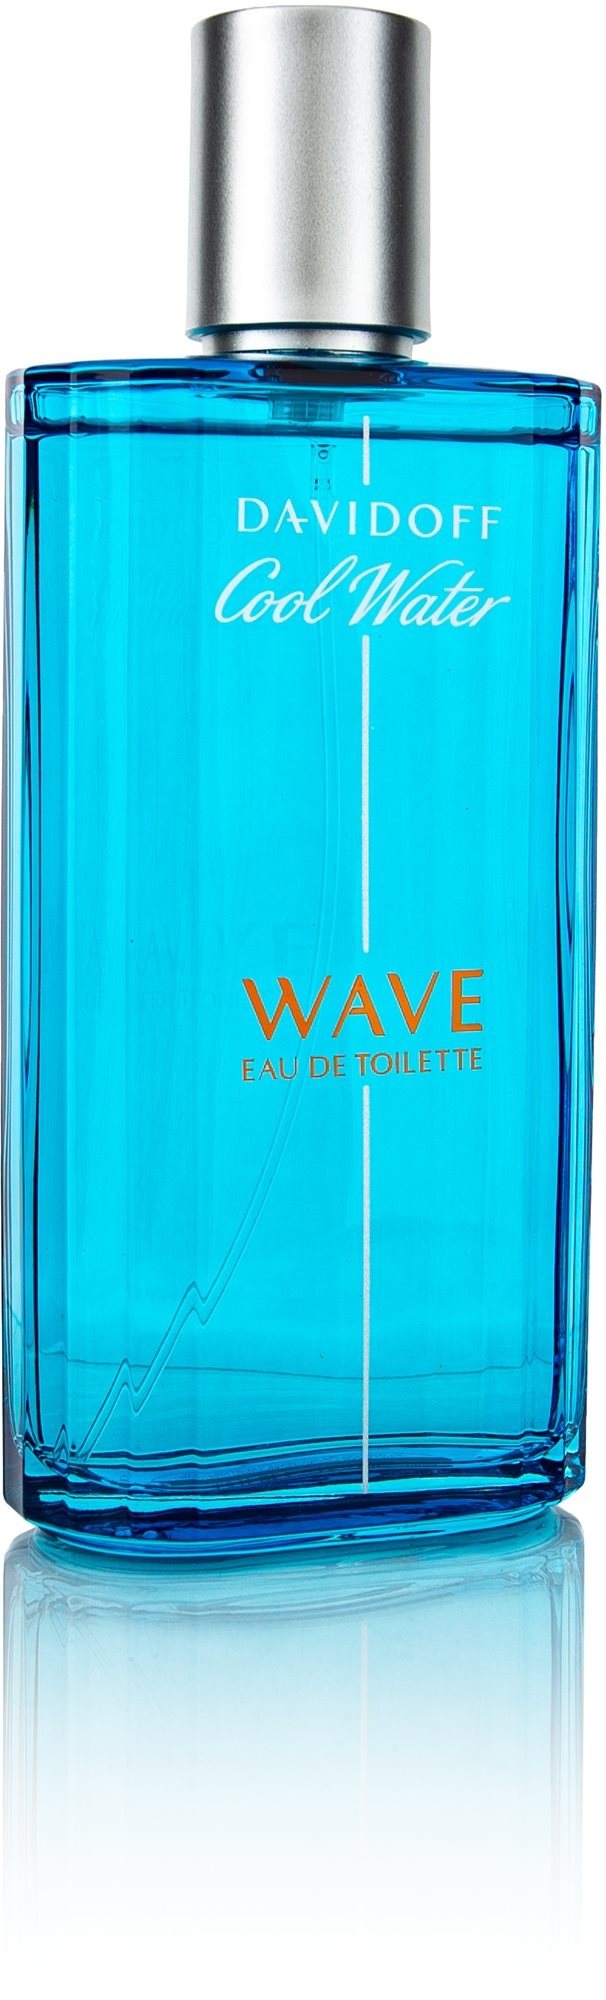 DAVIDOFF Cool Water Wave For Men EdT 125 ml